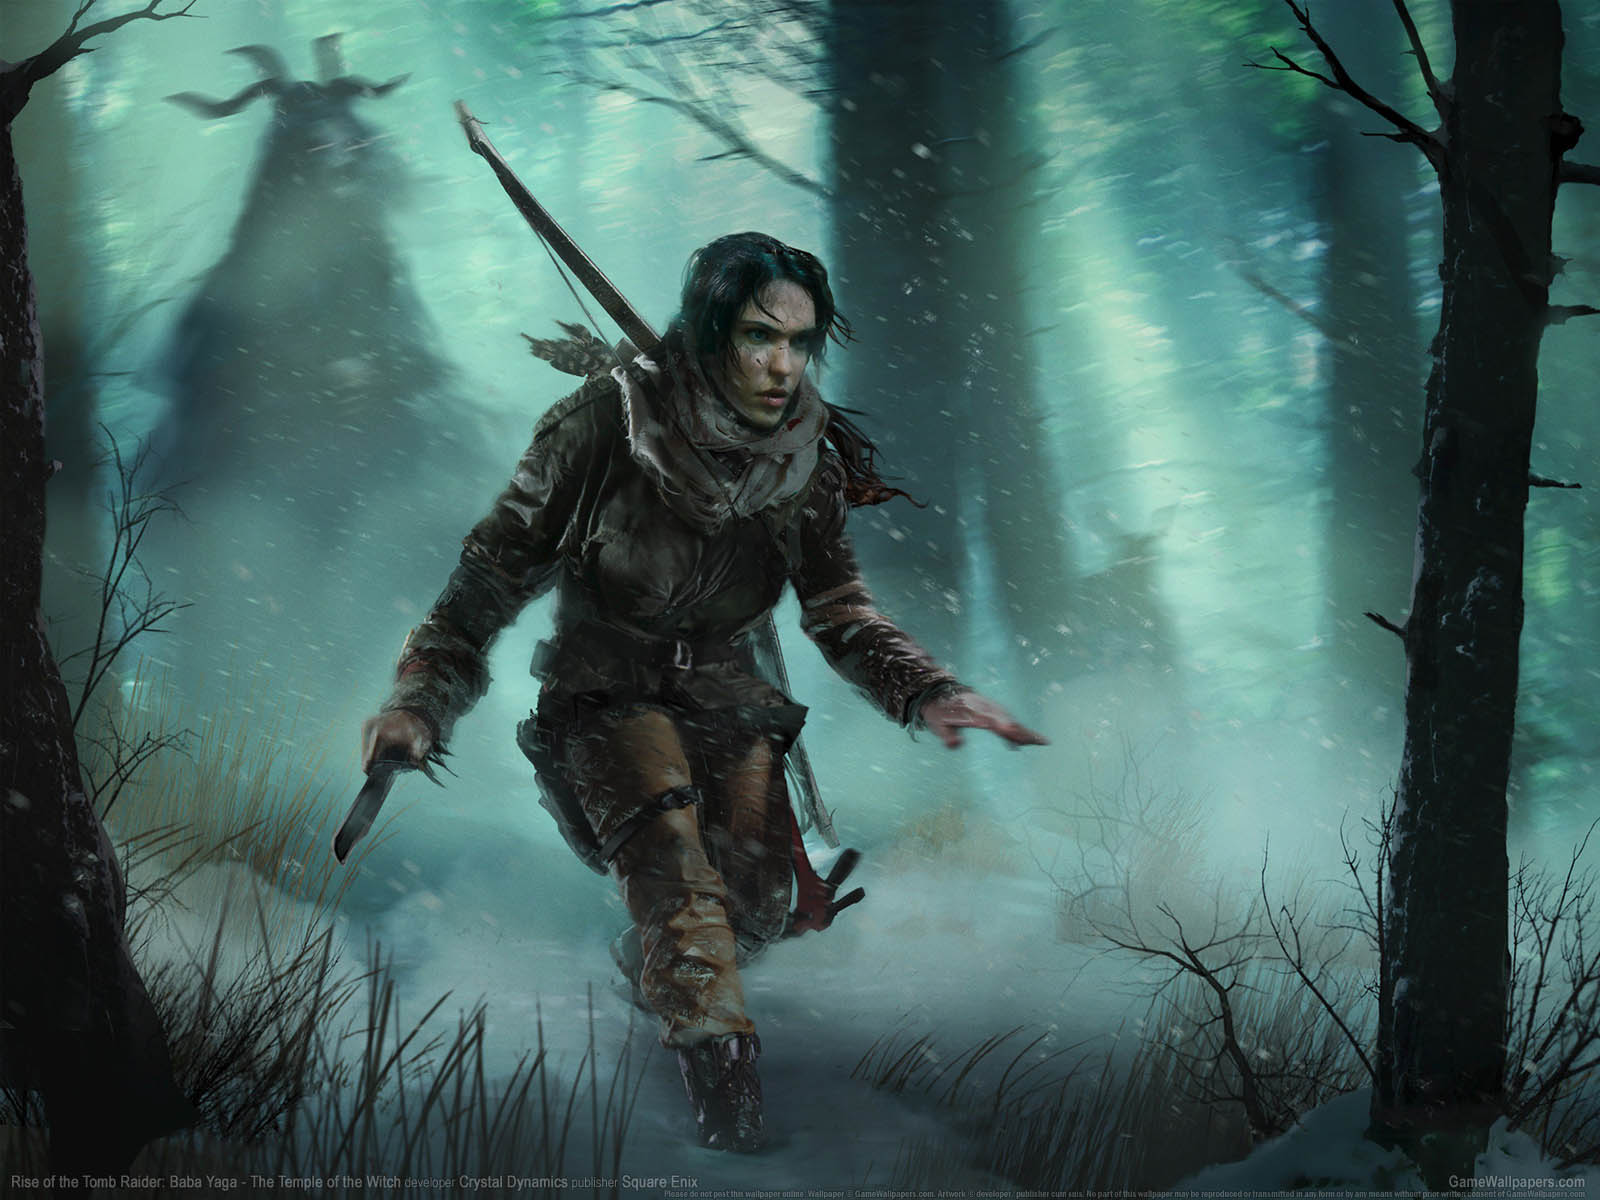 Rise of the Tomb Raider%3A Baba Yaga - The Temple of the Witch wallpaper 01 1600x1200